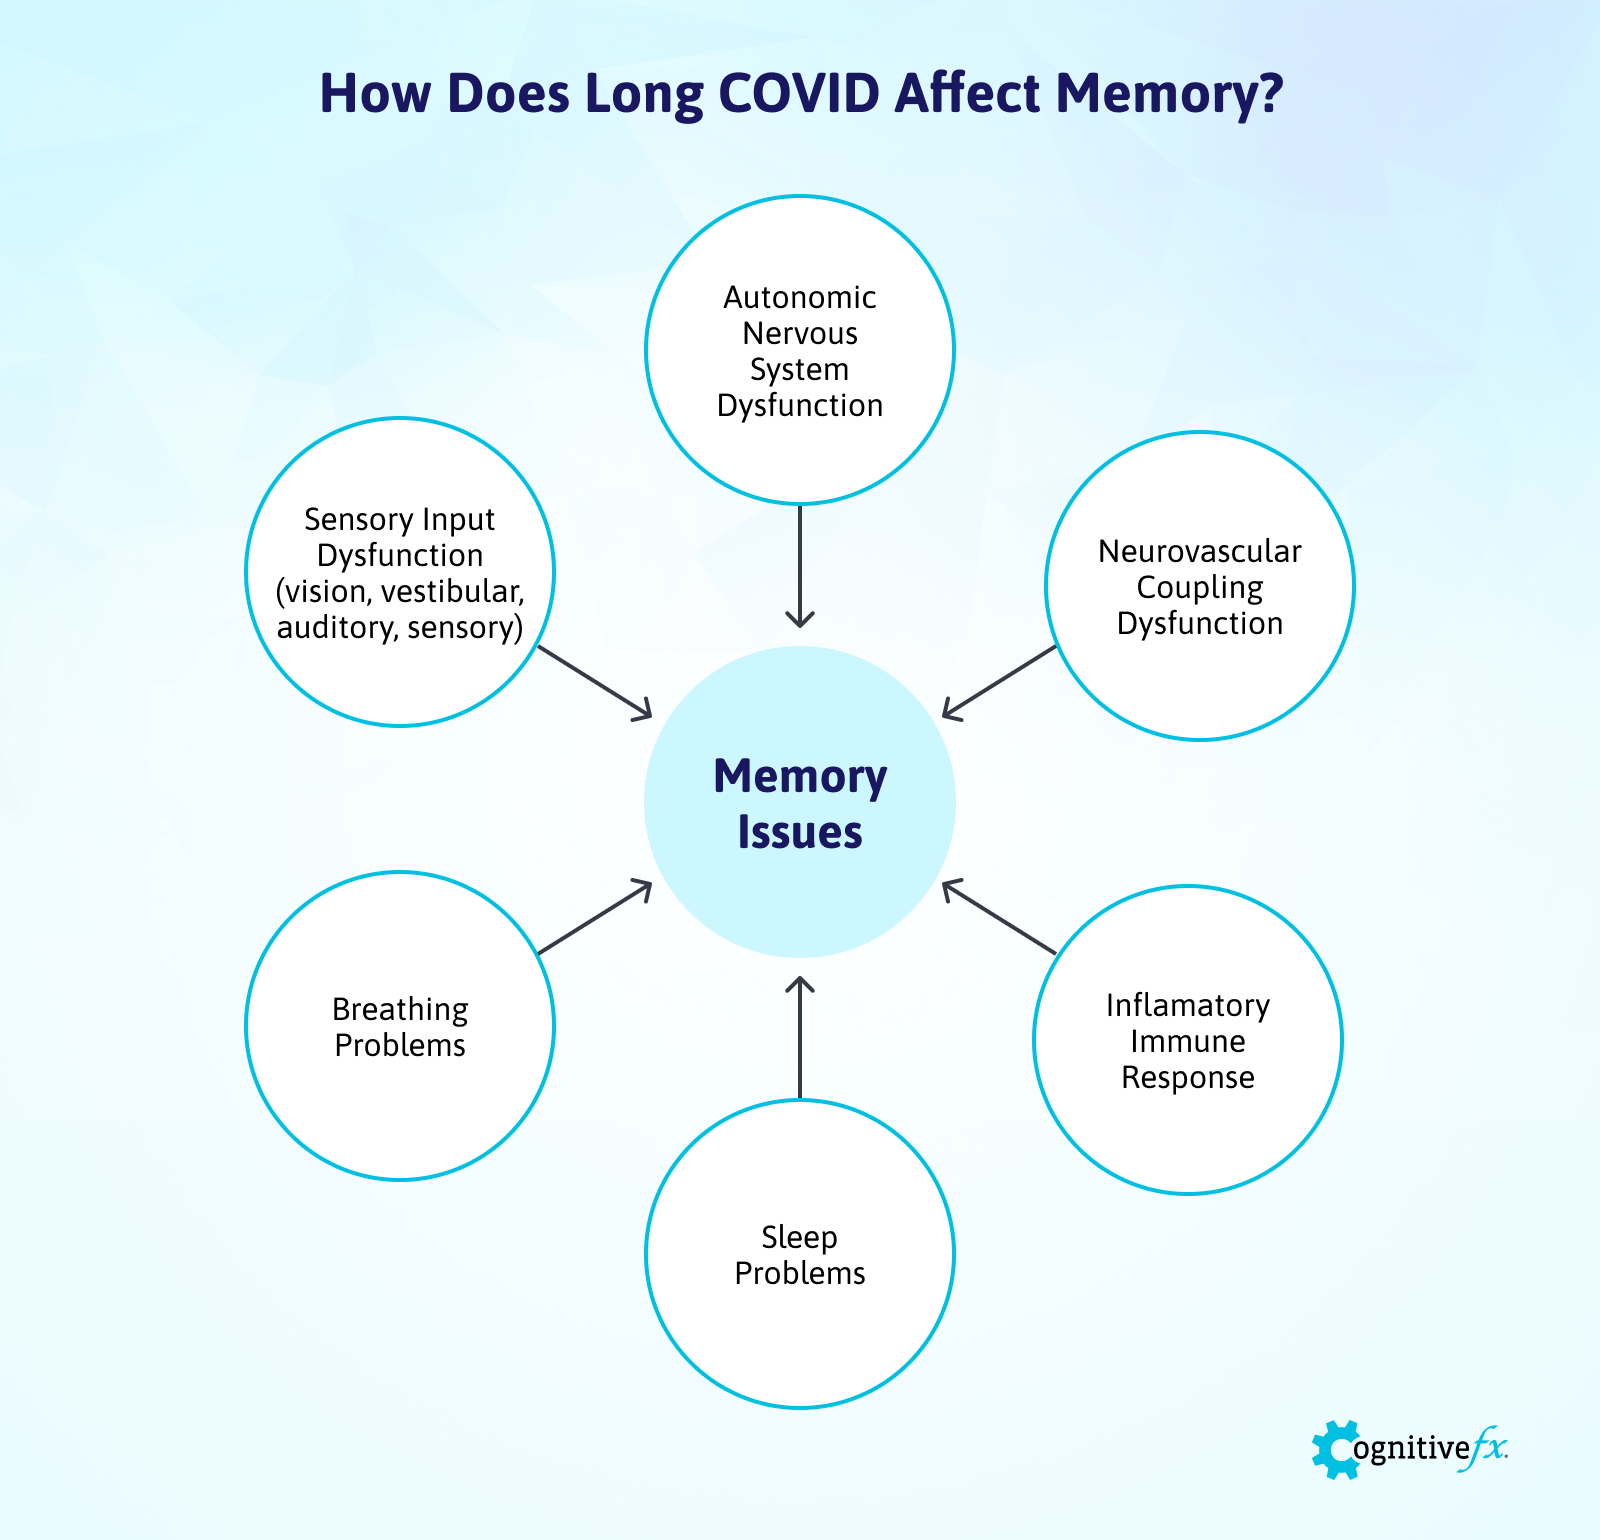 Long COVID can cause memory loss and other cognitive symptoms through several mechanisms.